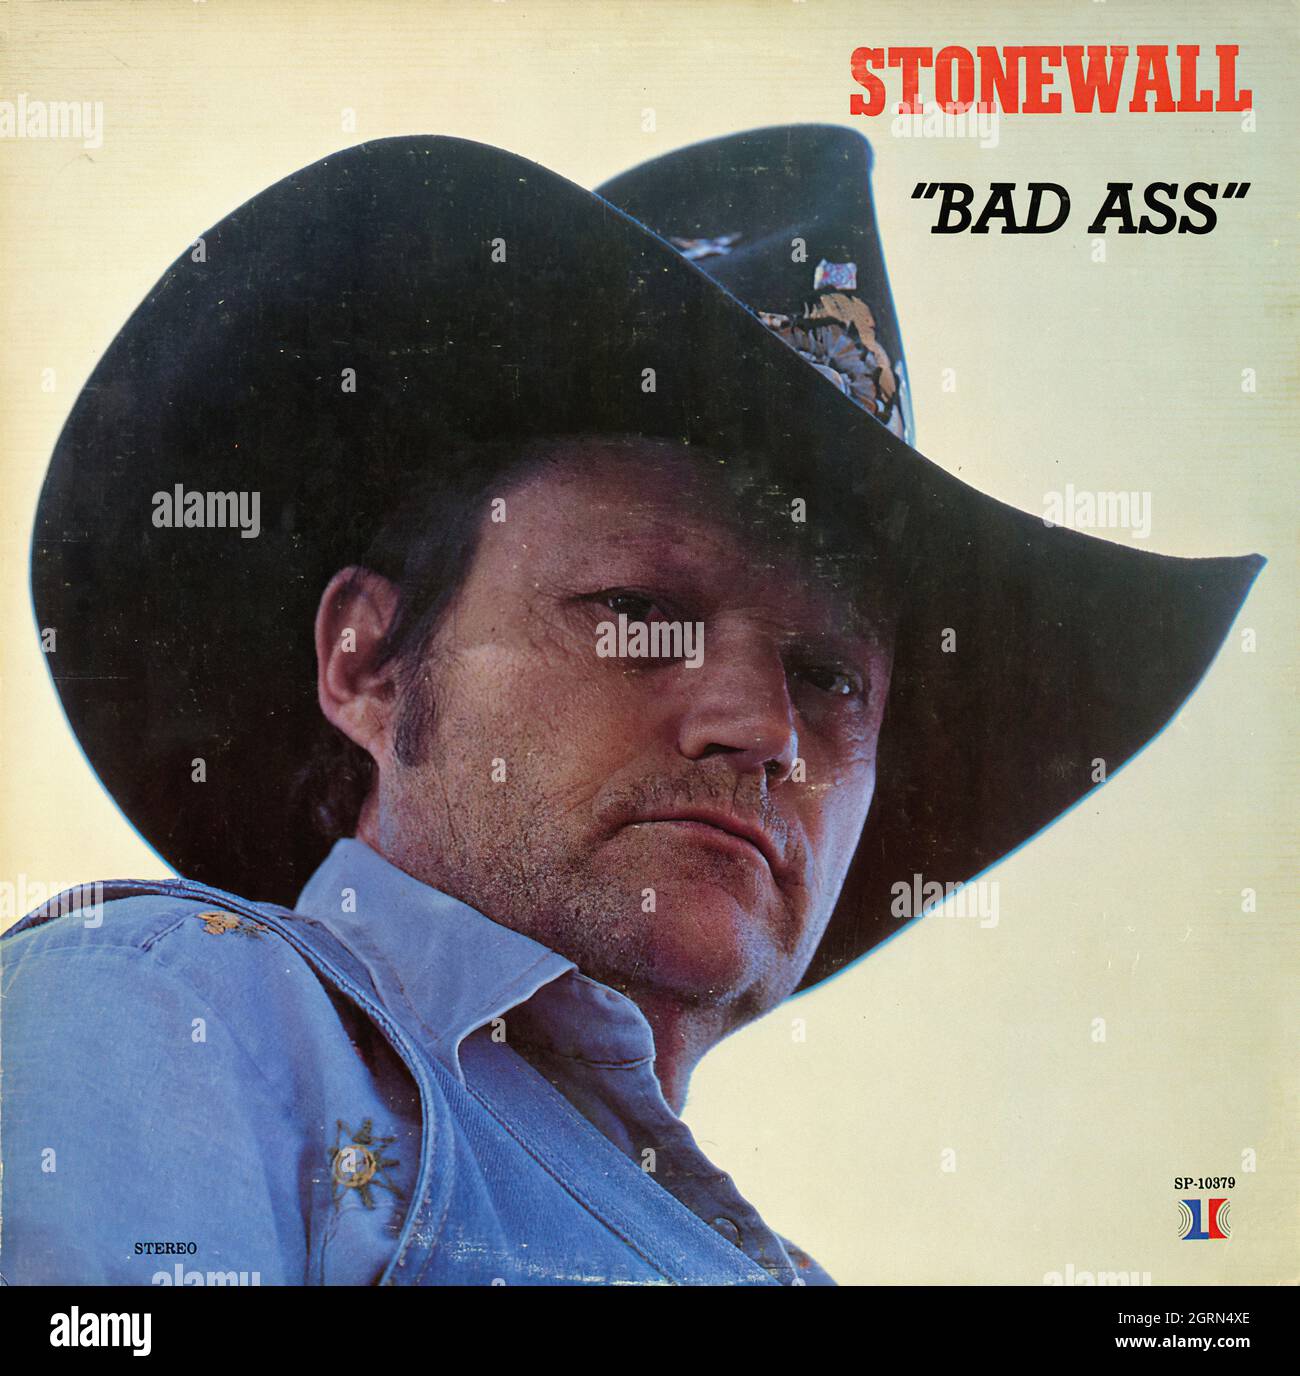 Stone Wall Bad Ass - Album di musica country vintage Foto Stock